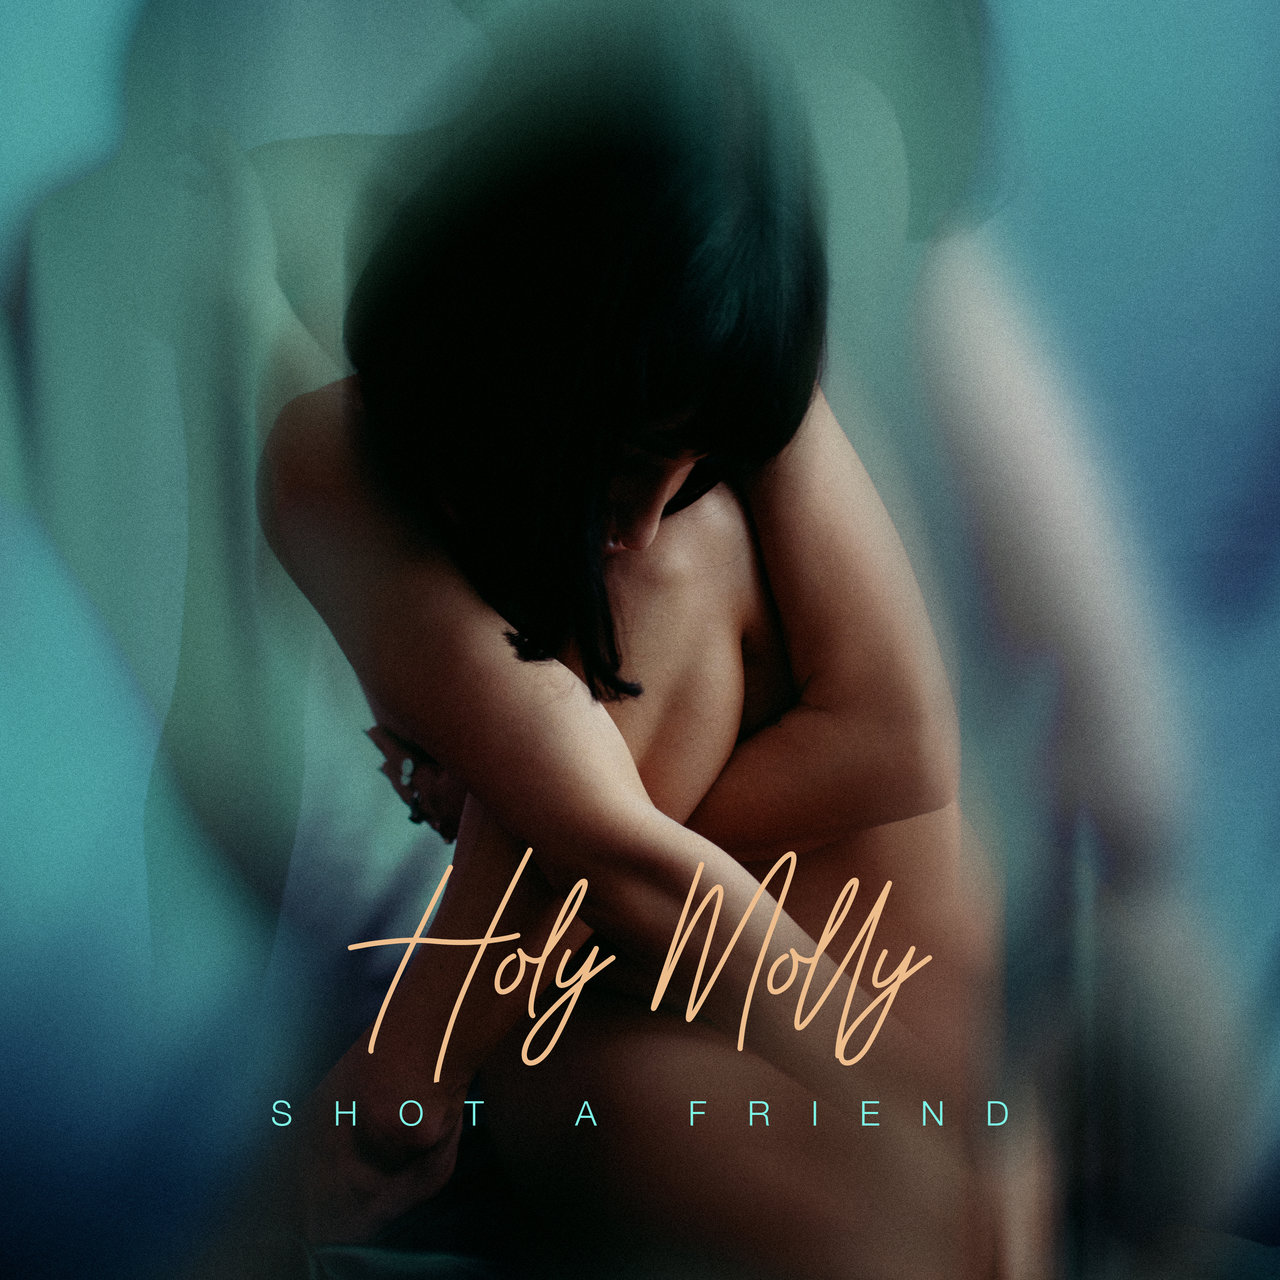 Holy Molly — Shot a friend cover artwork